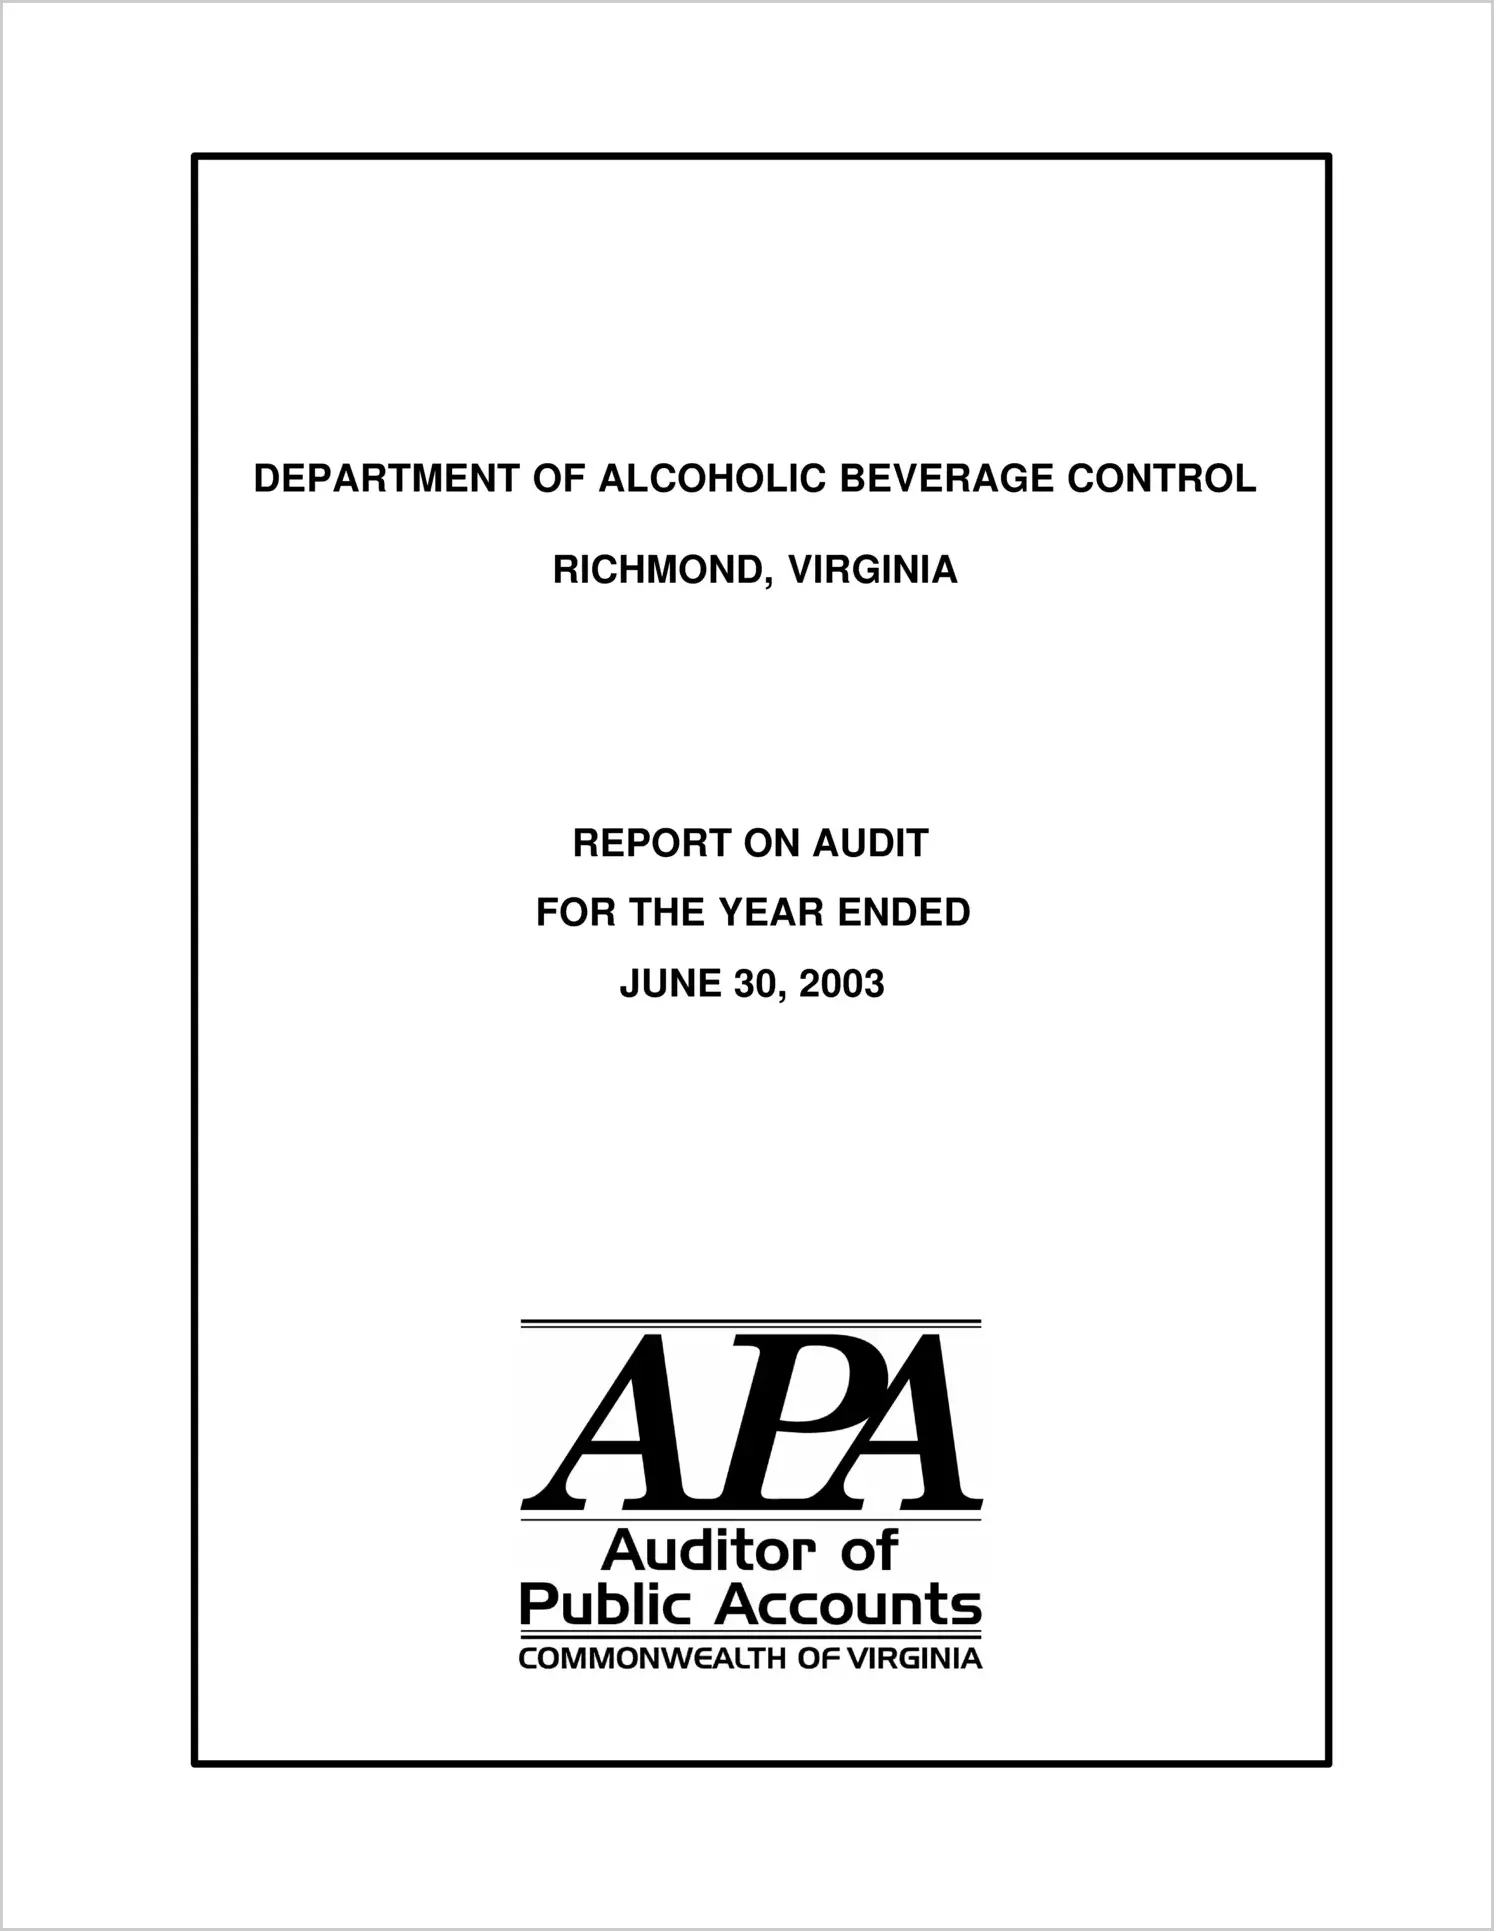 Department of Alcoholic Beverage Control for the year ended June 30, 2003